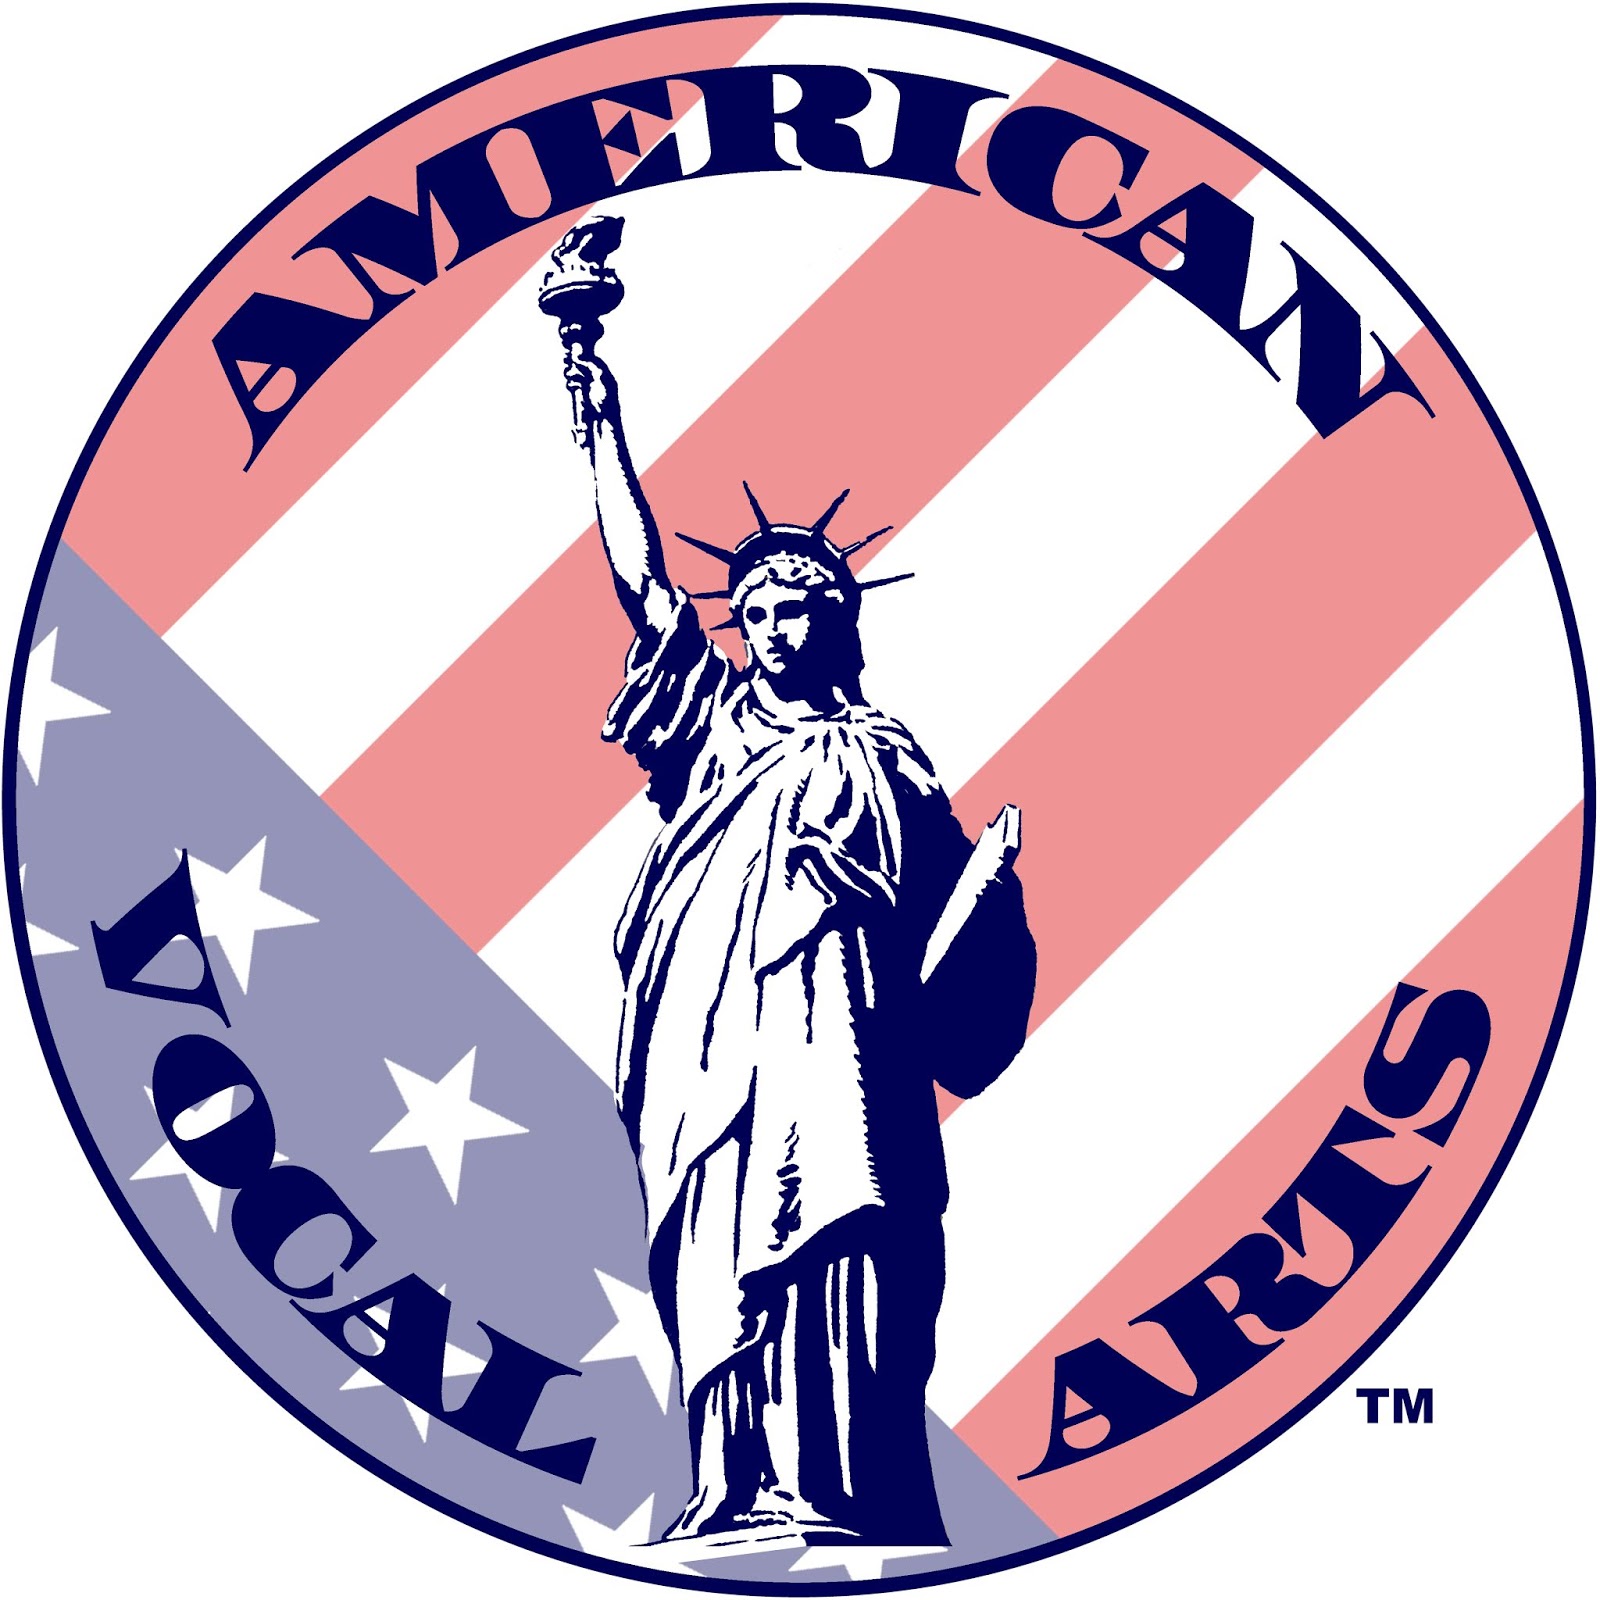 Germany And The United States Take Home Medals In The American Vocal Arts 2019 International Collegiate Singing Championship 